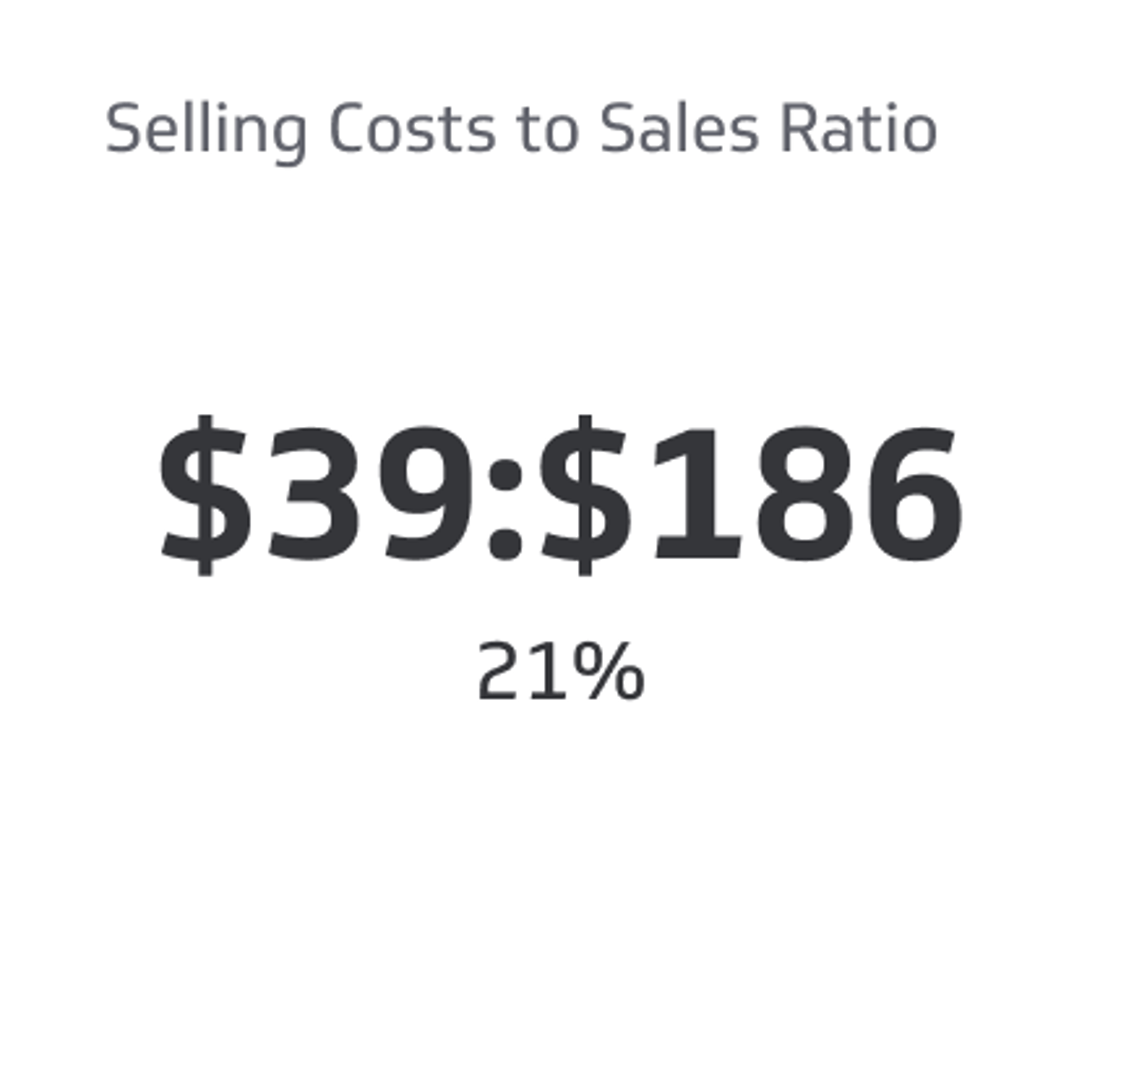 Sales KPI Examples - Selling Costs to Sales Ratio Metric